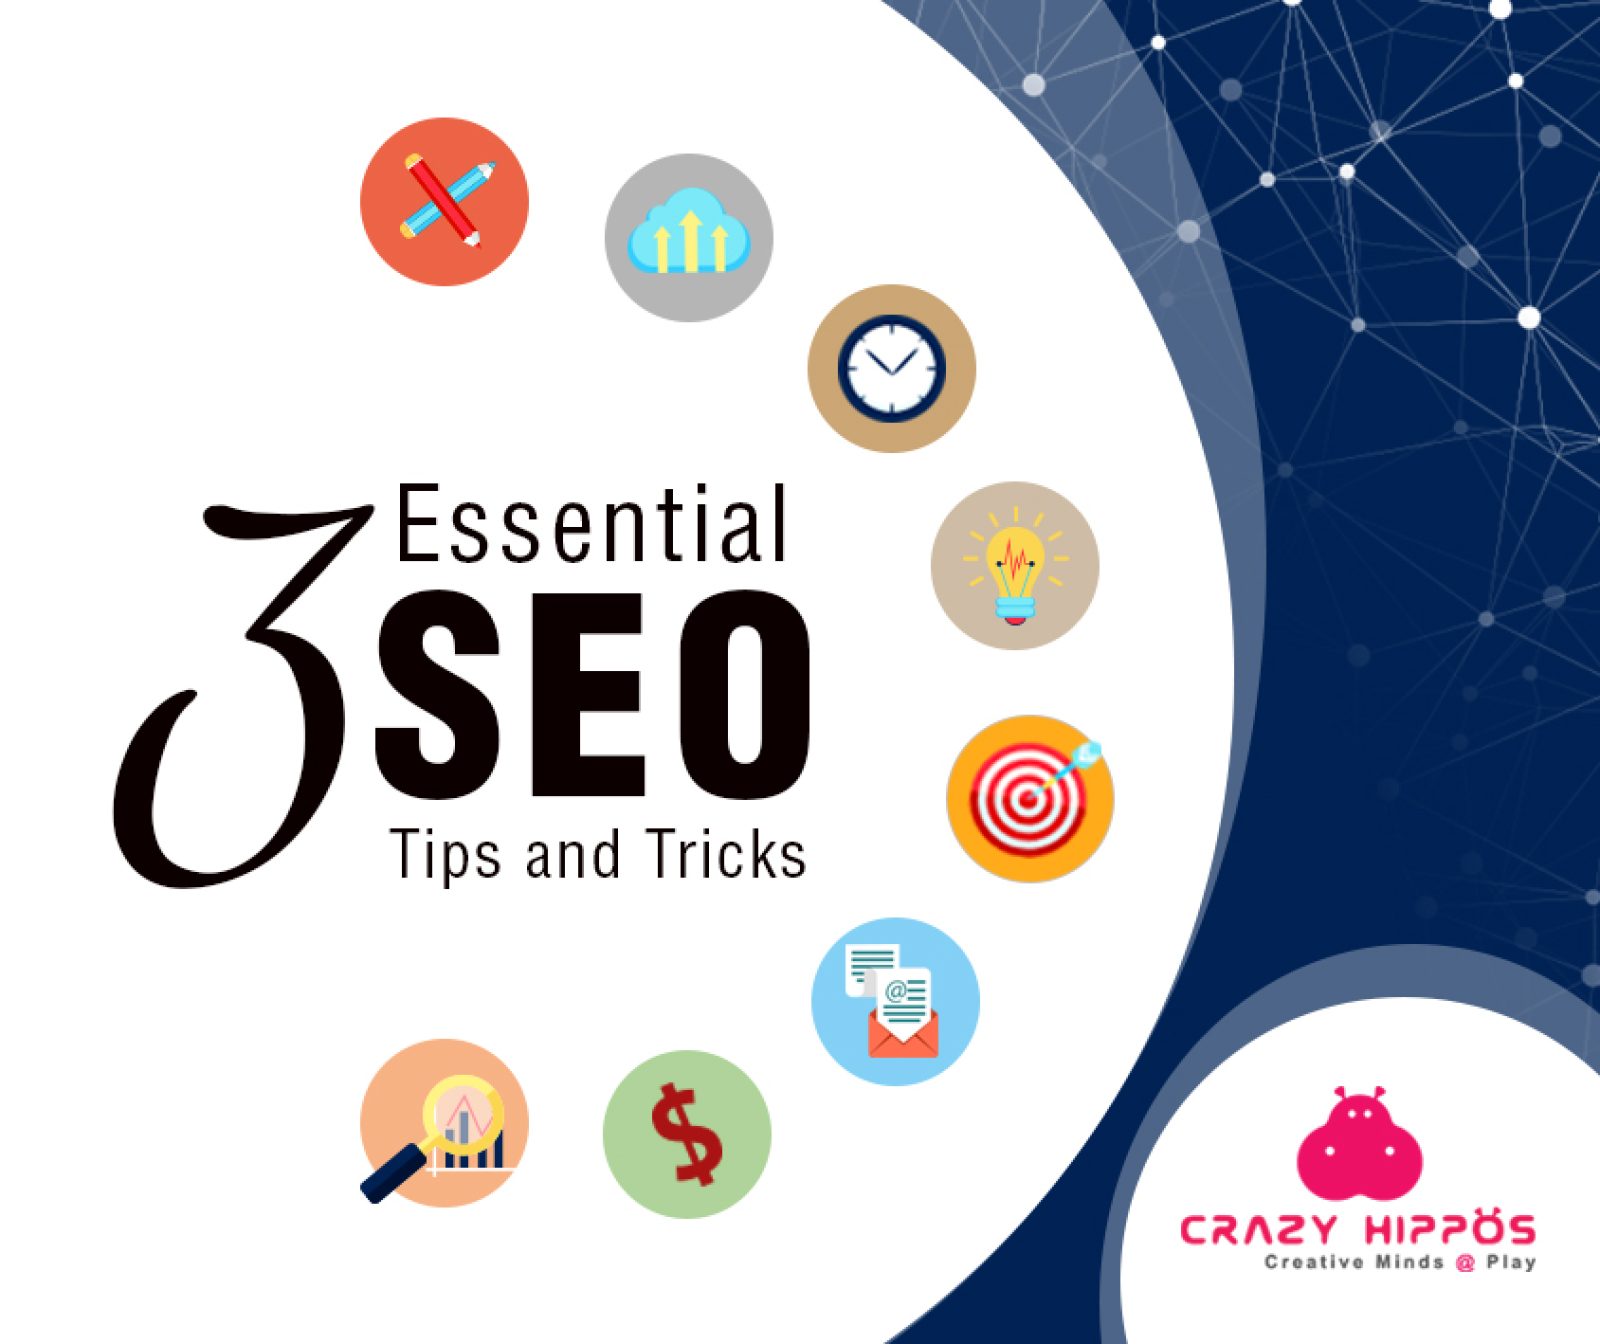 3 ESSENTIAL SEO TIPS AND TRICKS